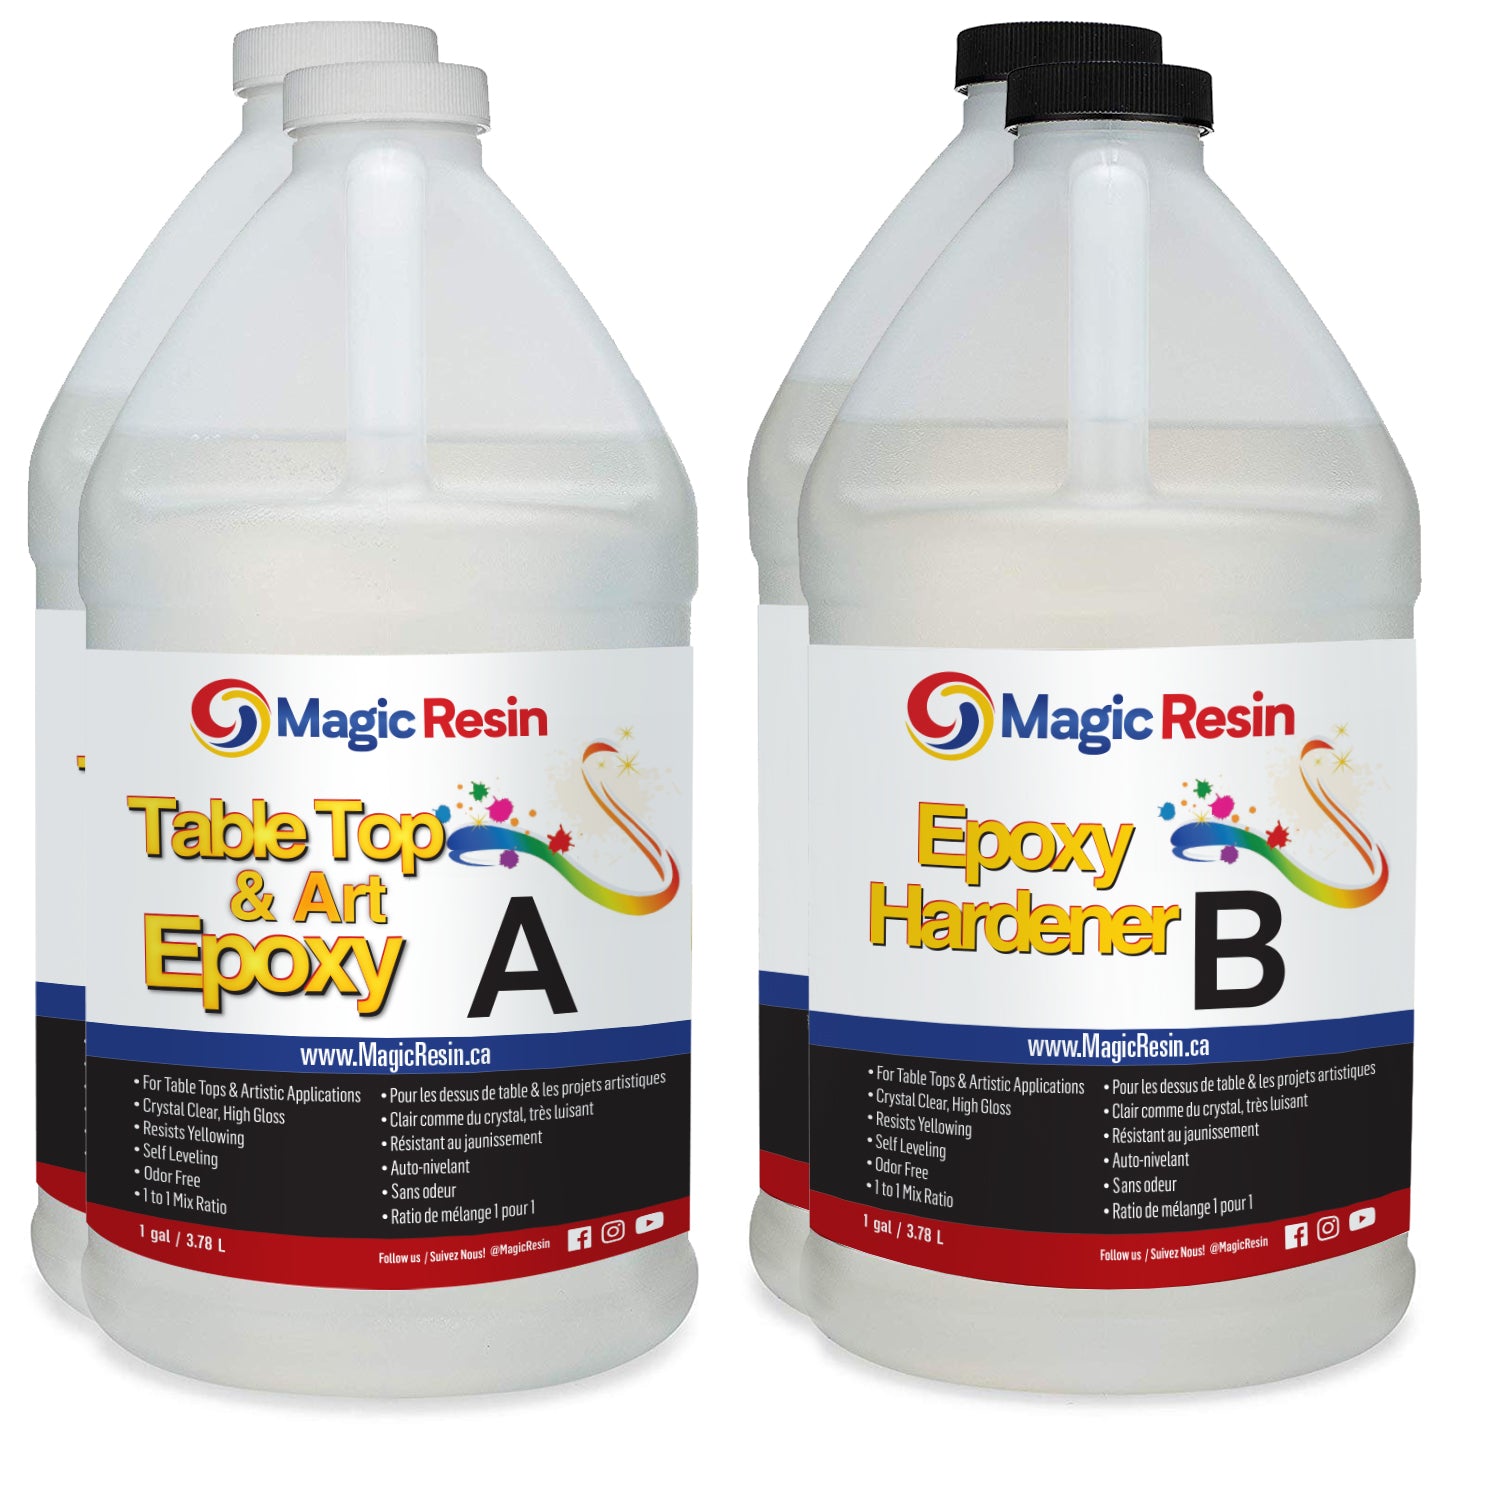 4 Gallon | Table Top & Art Clear Coating Epoxy Resin Kit | Free Express Shipping